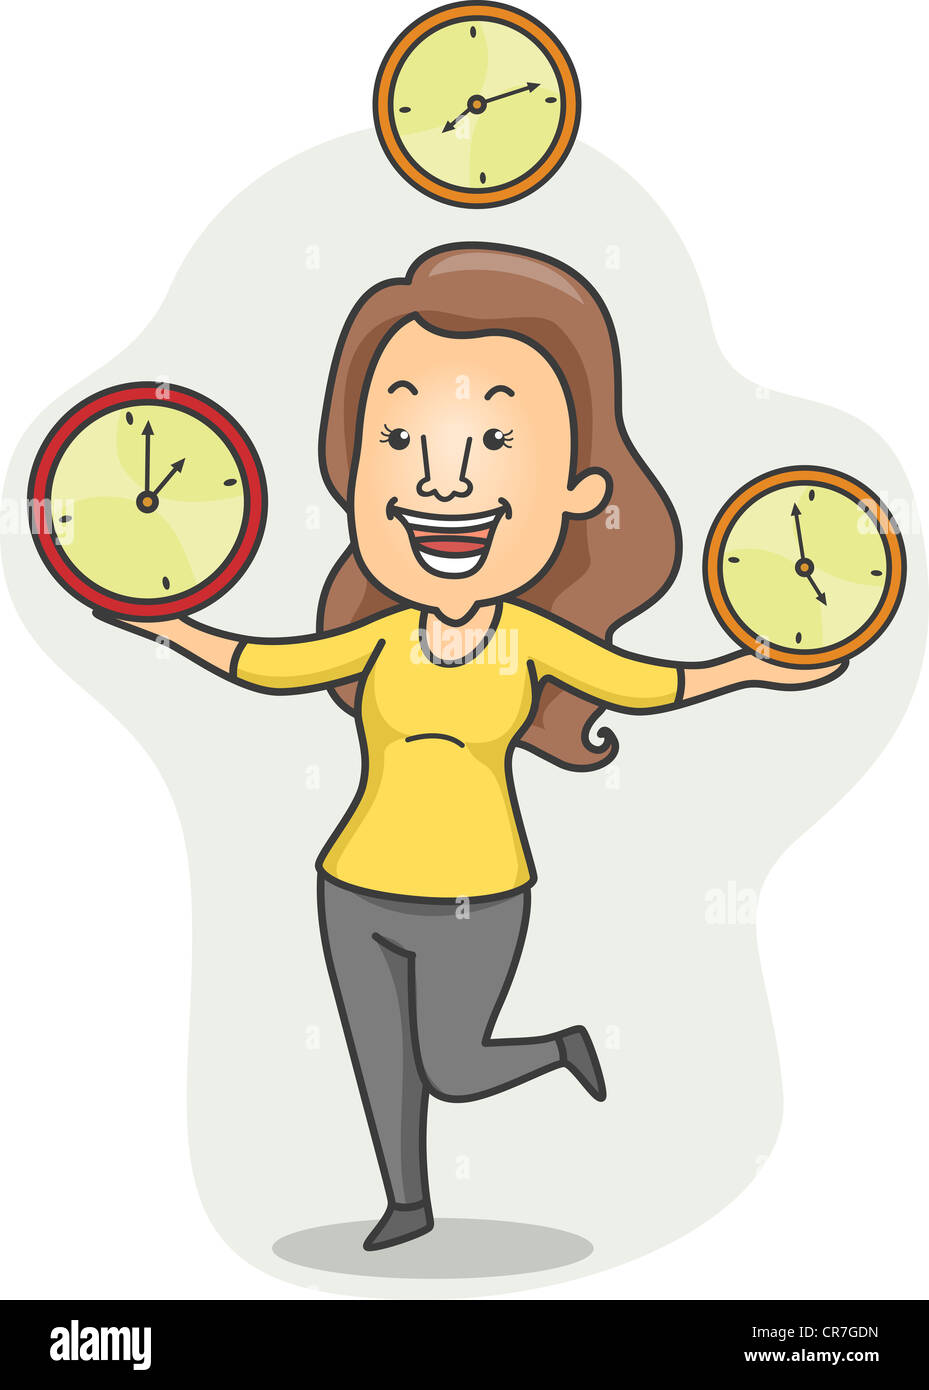 Illustration of a Girl Juggling Time Stock Photo